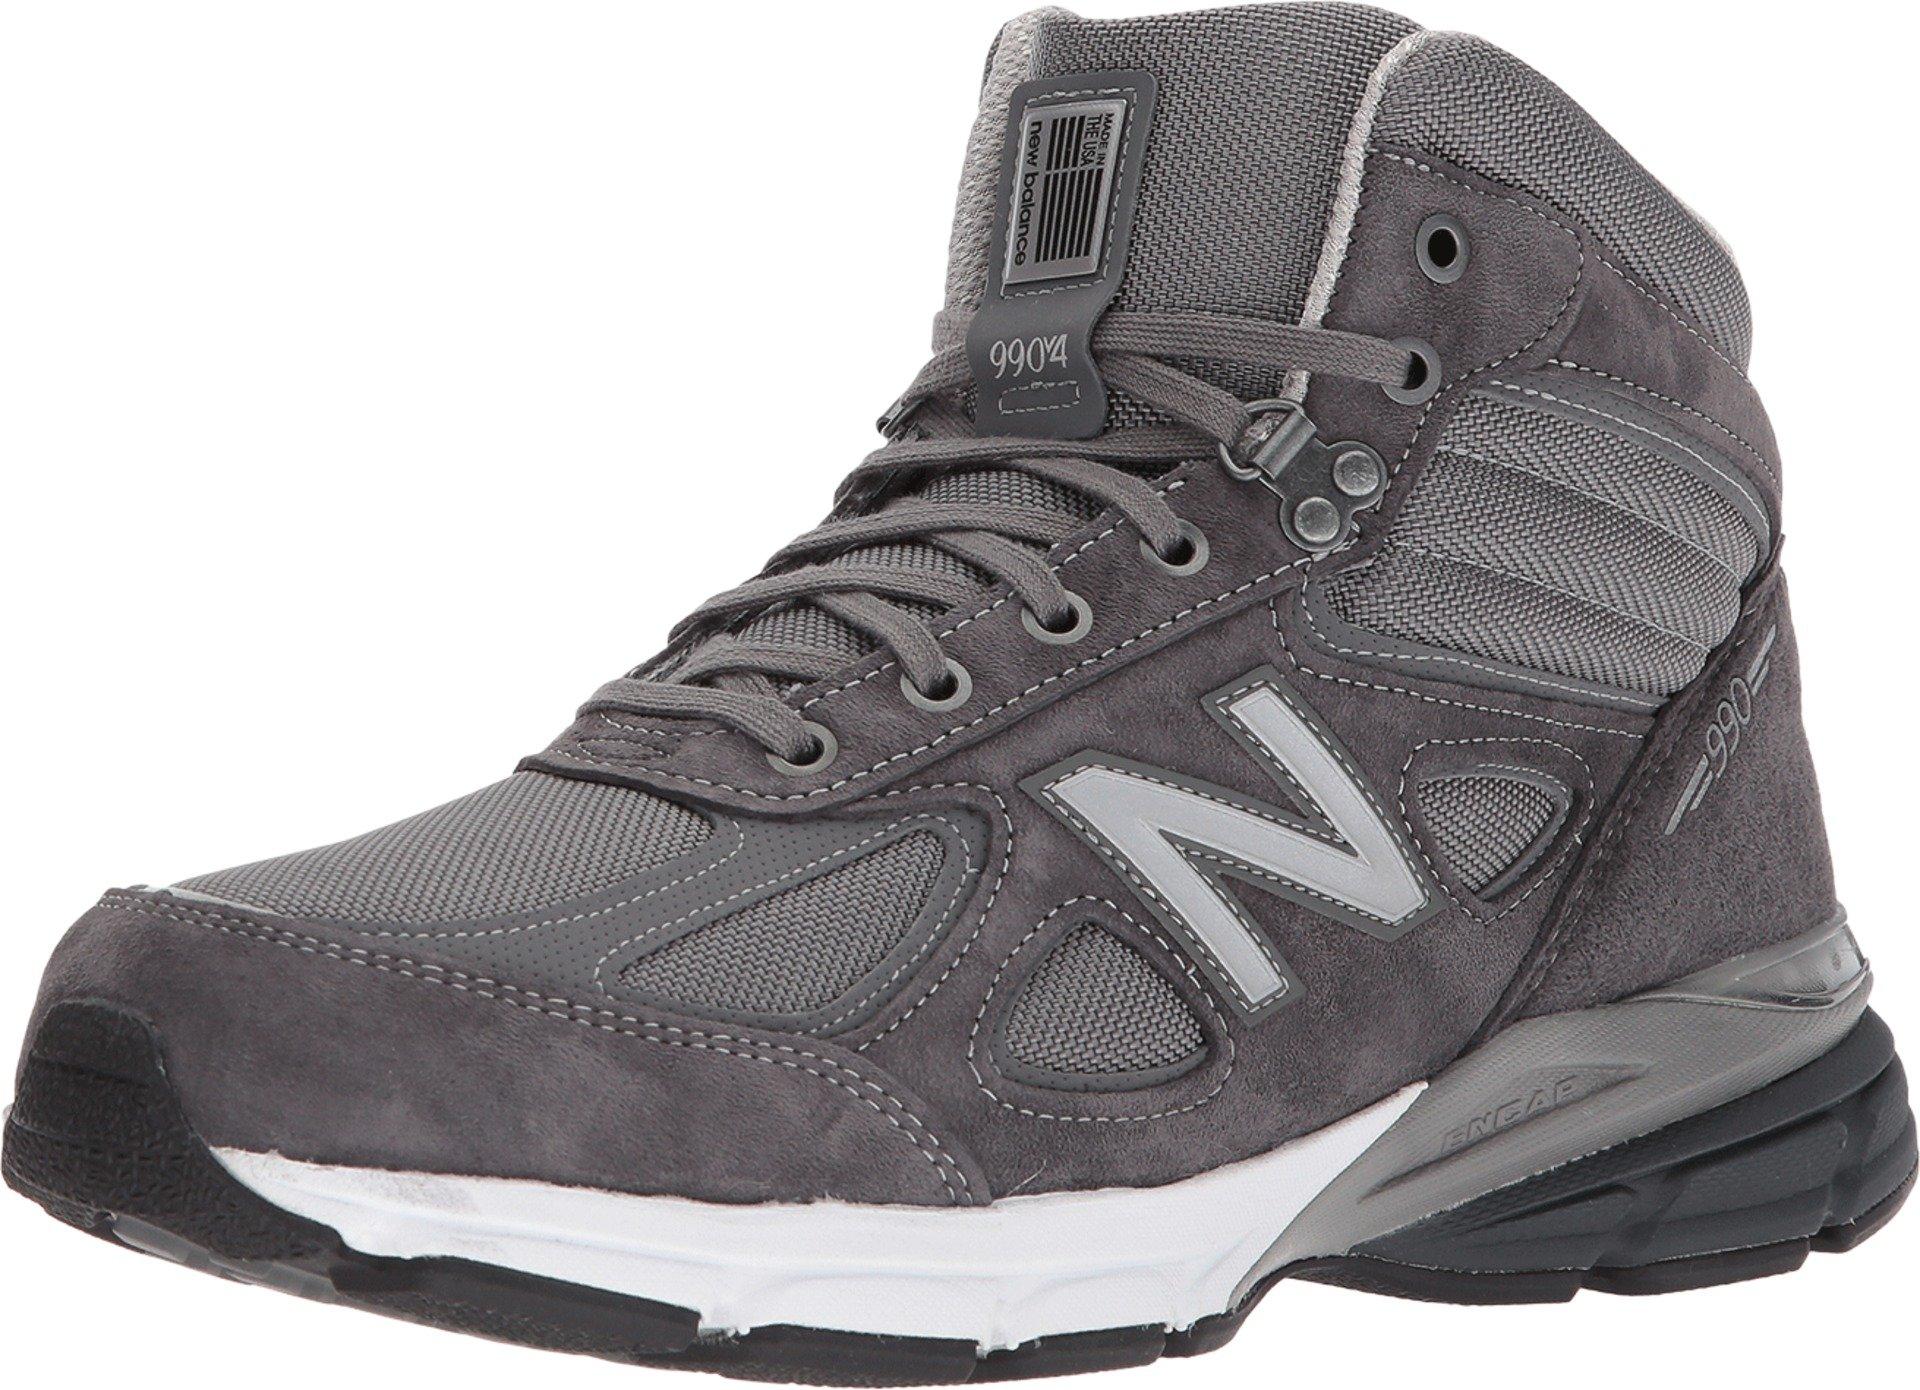 New Balance Rubber 990v4 Boot in Grey 